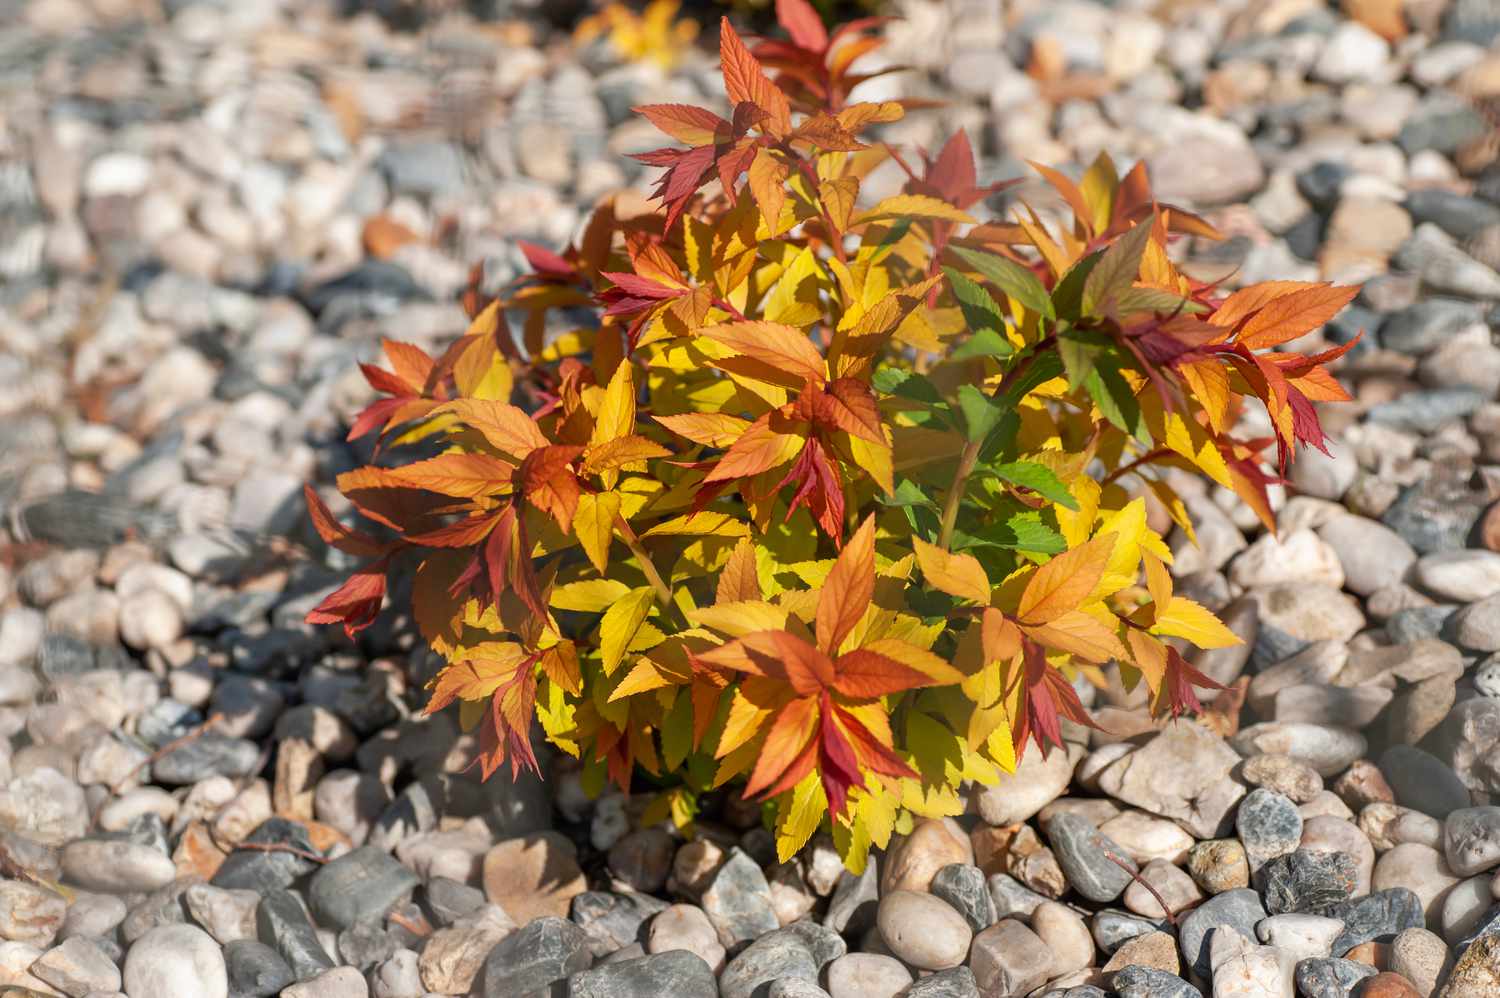 Goldflame spirea plant in middle of pebbles with red, orange, yellow and green leaves in sunlight